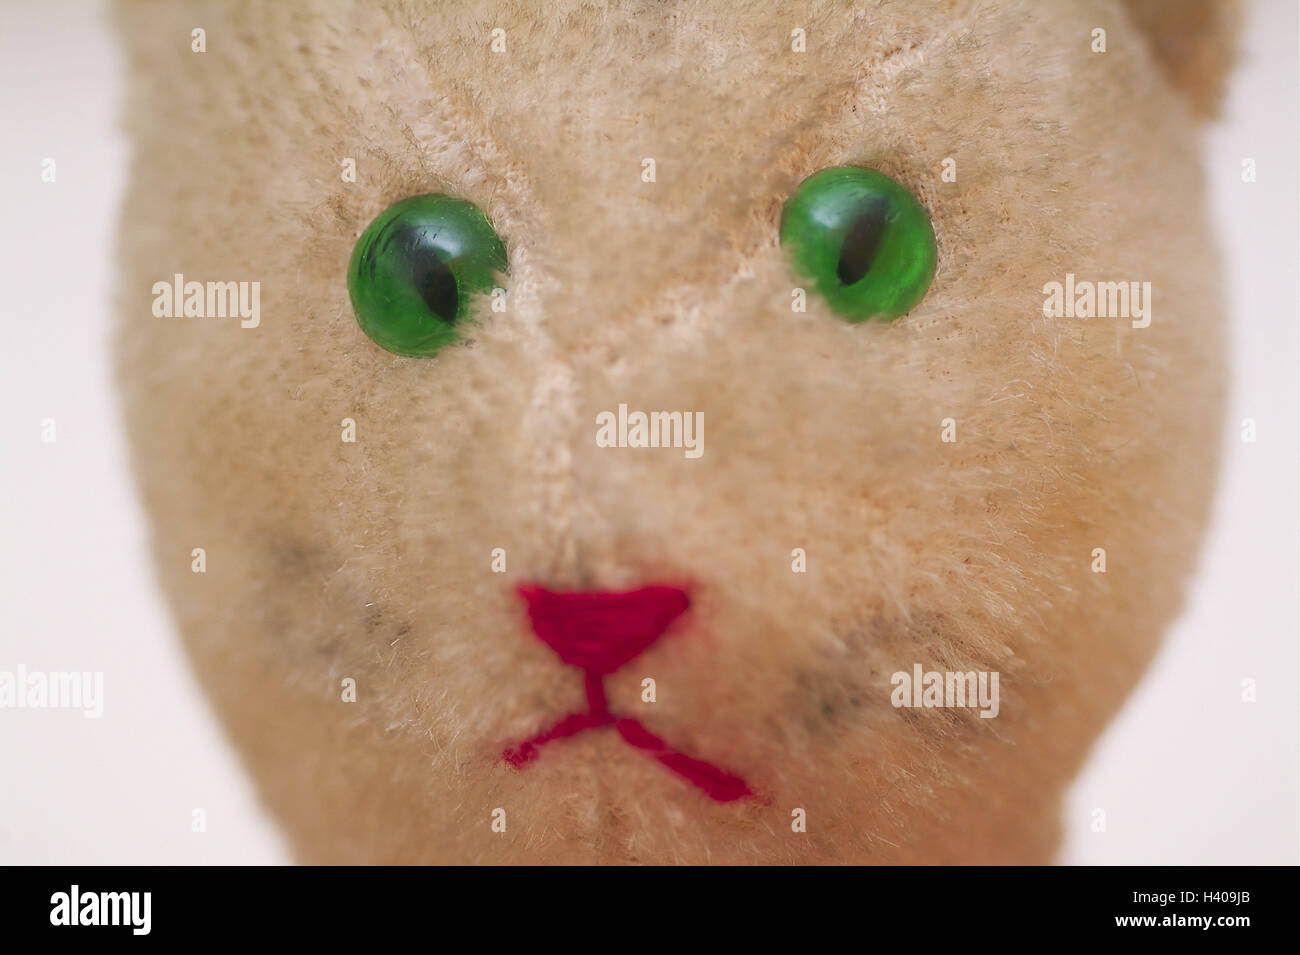 Soft toy, cat, detail, look, toys, soft animal, nonsense animal, soft toy, substance cat, nostalgically, old, uses, worn-out, discards, forget, portrait, colour eyes green, view sadly, recollection, childhood, product photography, Still life Stock Photo